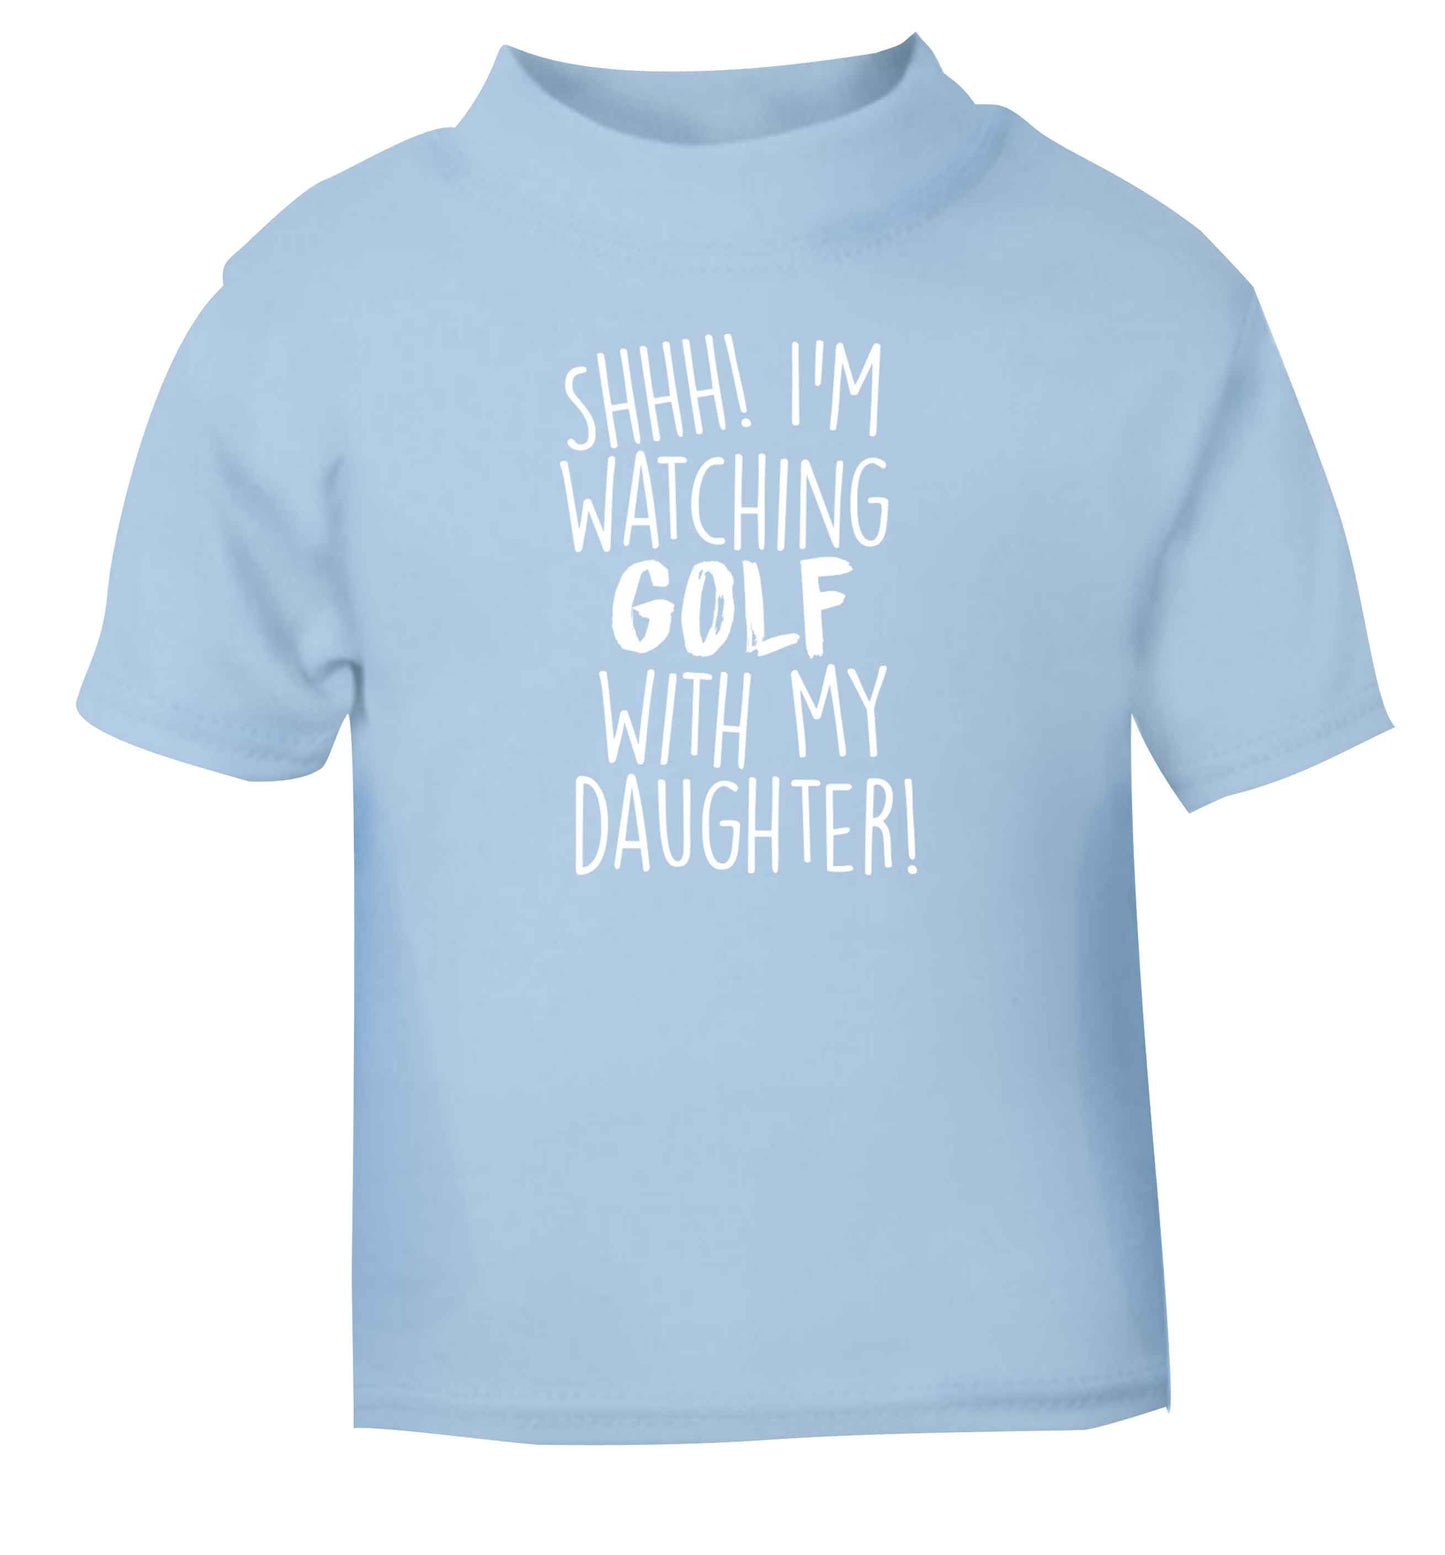 Shh I'm watching golf with my daughter light blue Baby Toddler Tshirt 2 Years